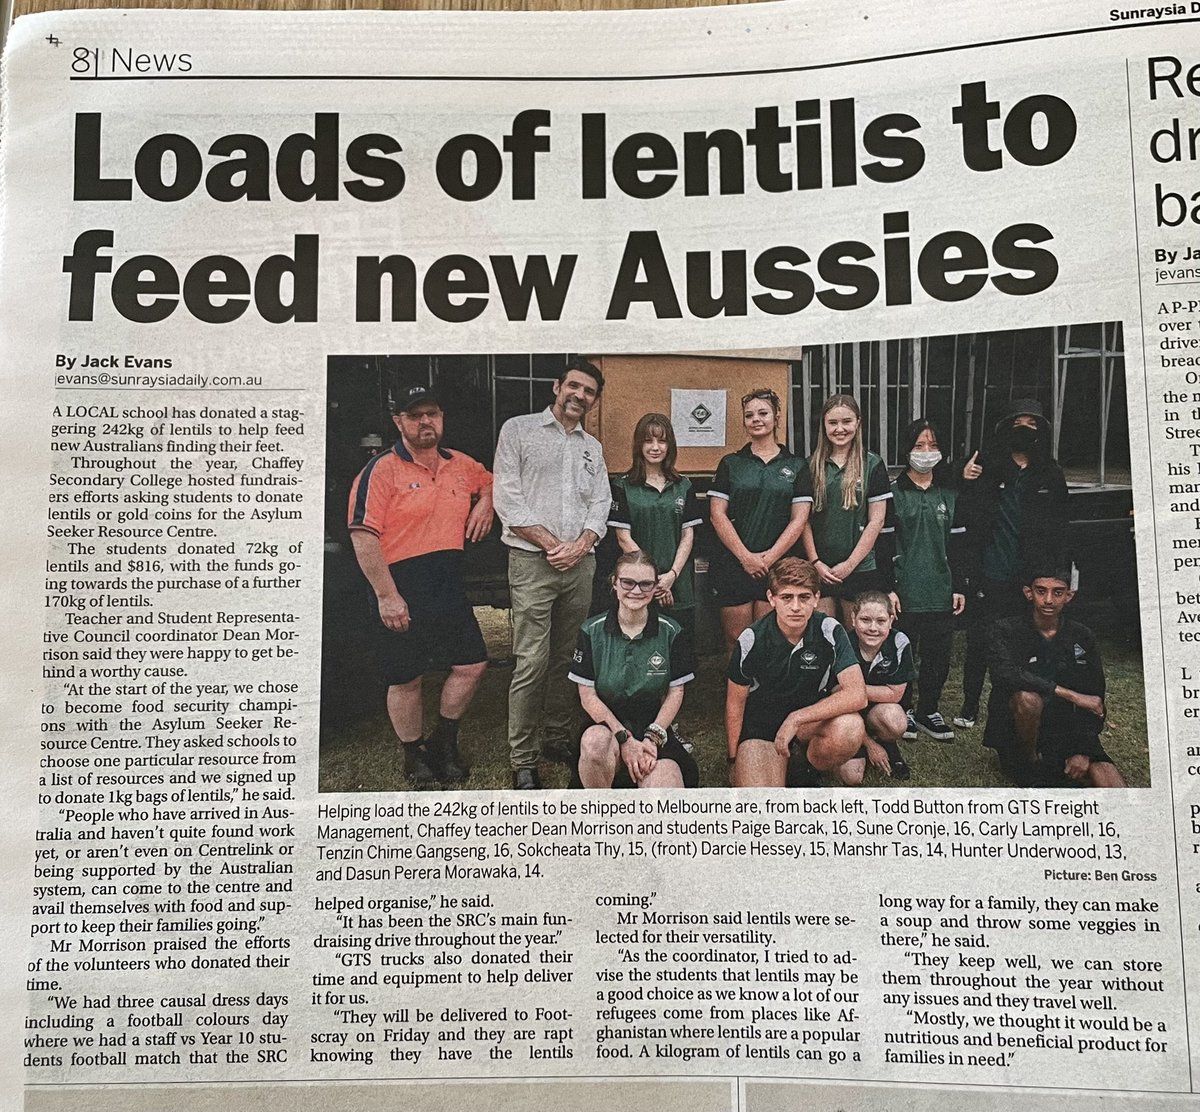 This is our Australia ❤️ The beautiful students at Chaffey Secondary College generously donated over 200kg of lentils to the ASRC Foodbank. Thank you for creating a seat at the table of welcome for refugee families.